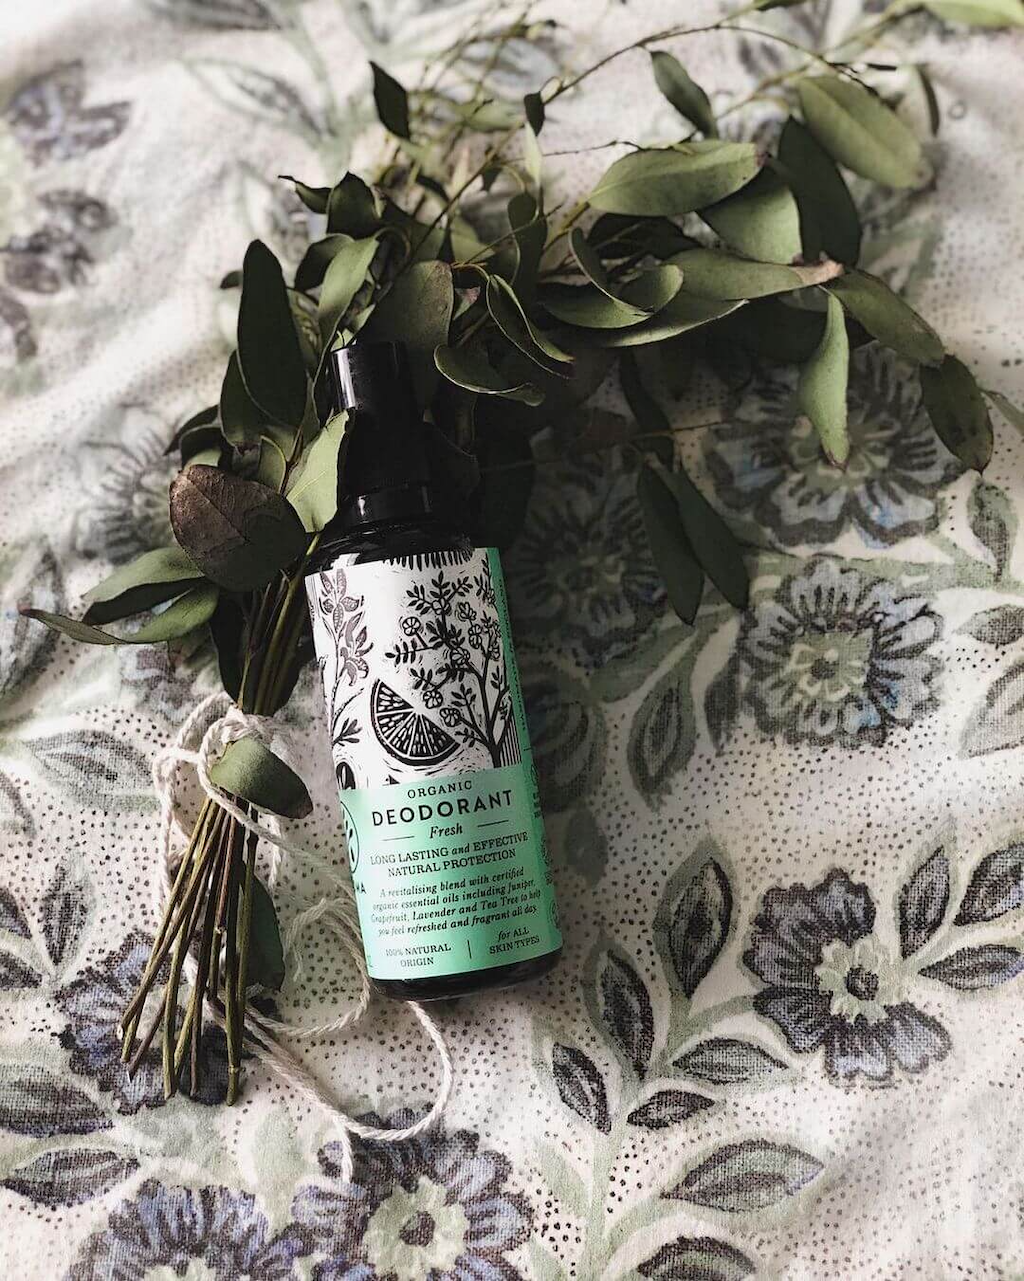 Haoma Organic Spray Deodorant. Certified organic deodorant without bicarbonate of soda. The Fresh deodorant is sitting on a black and white tablecloth with a bunch of dried eucalyptus behind it.